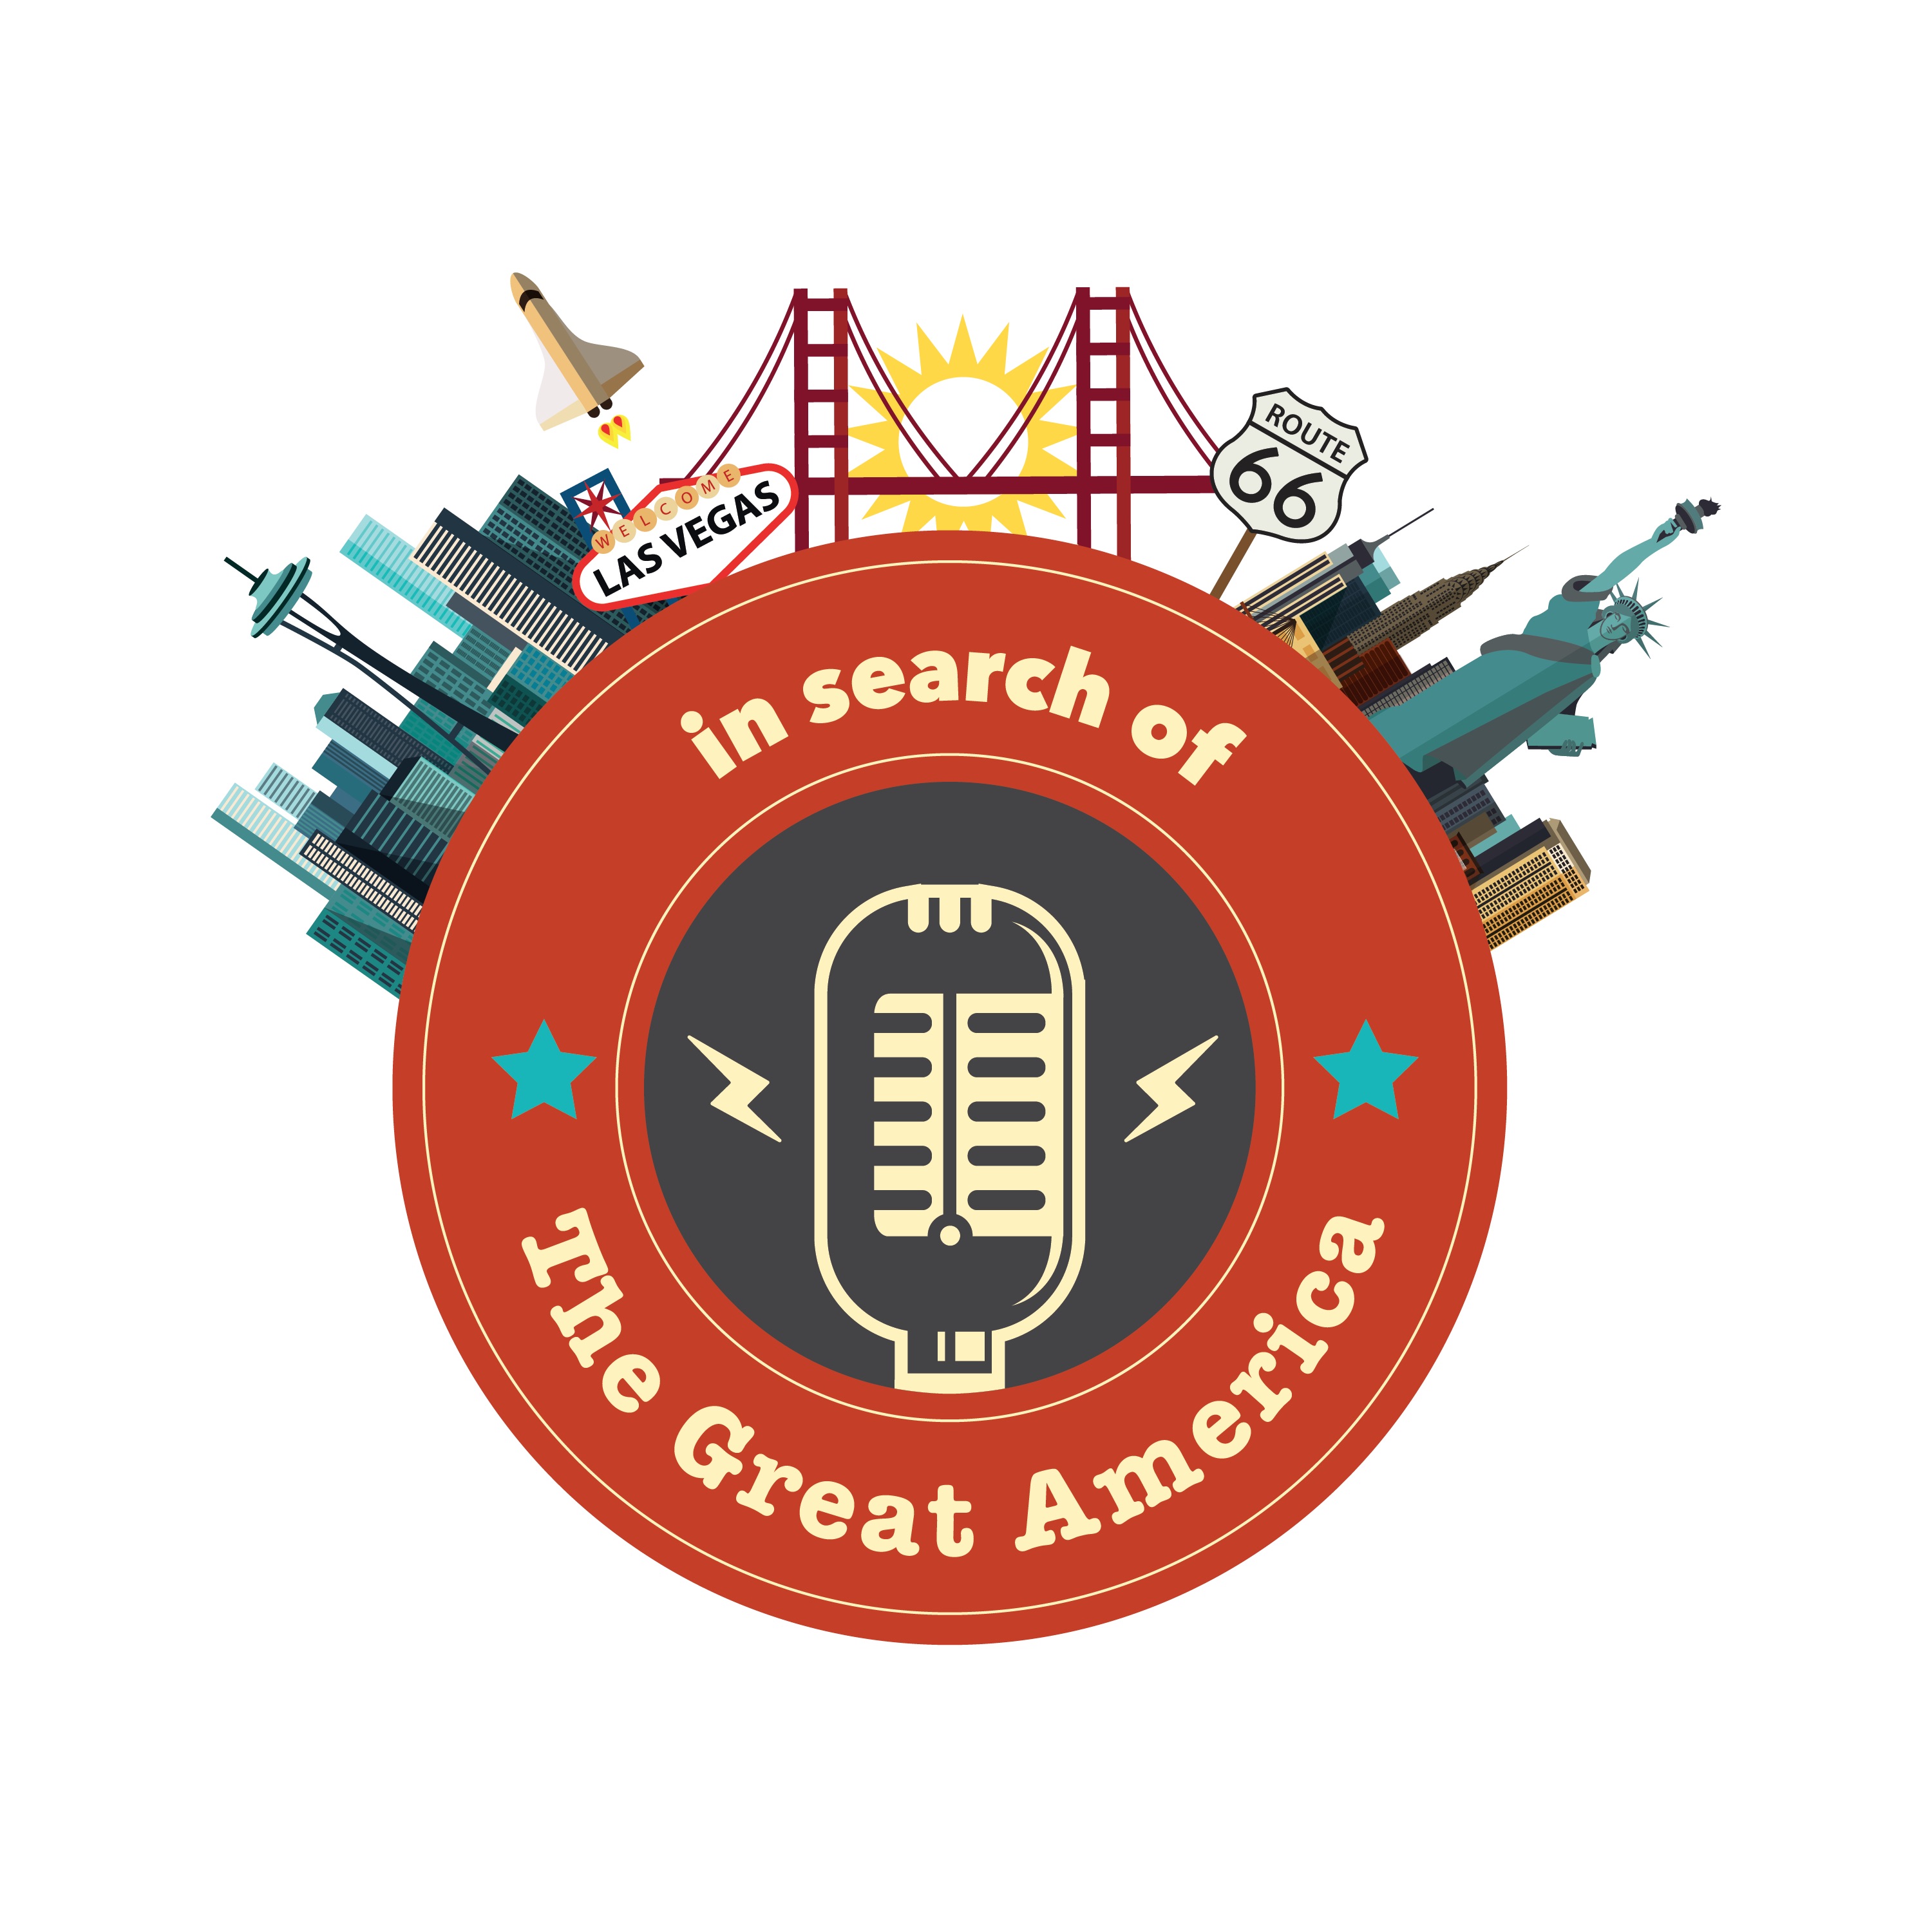 In Search of the Great America